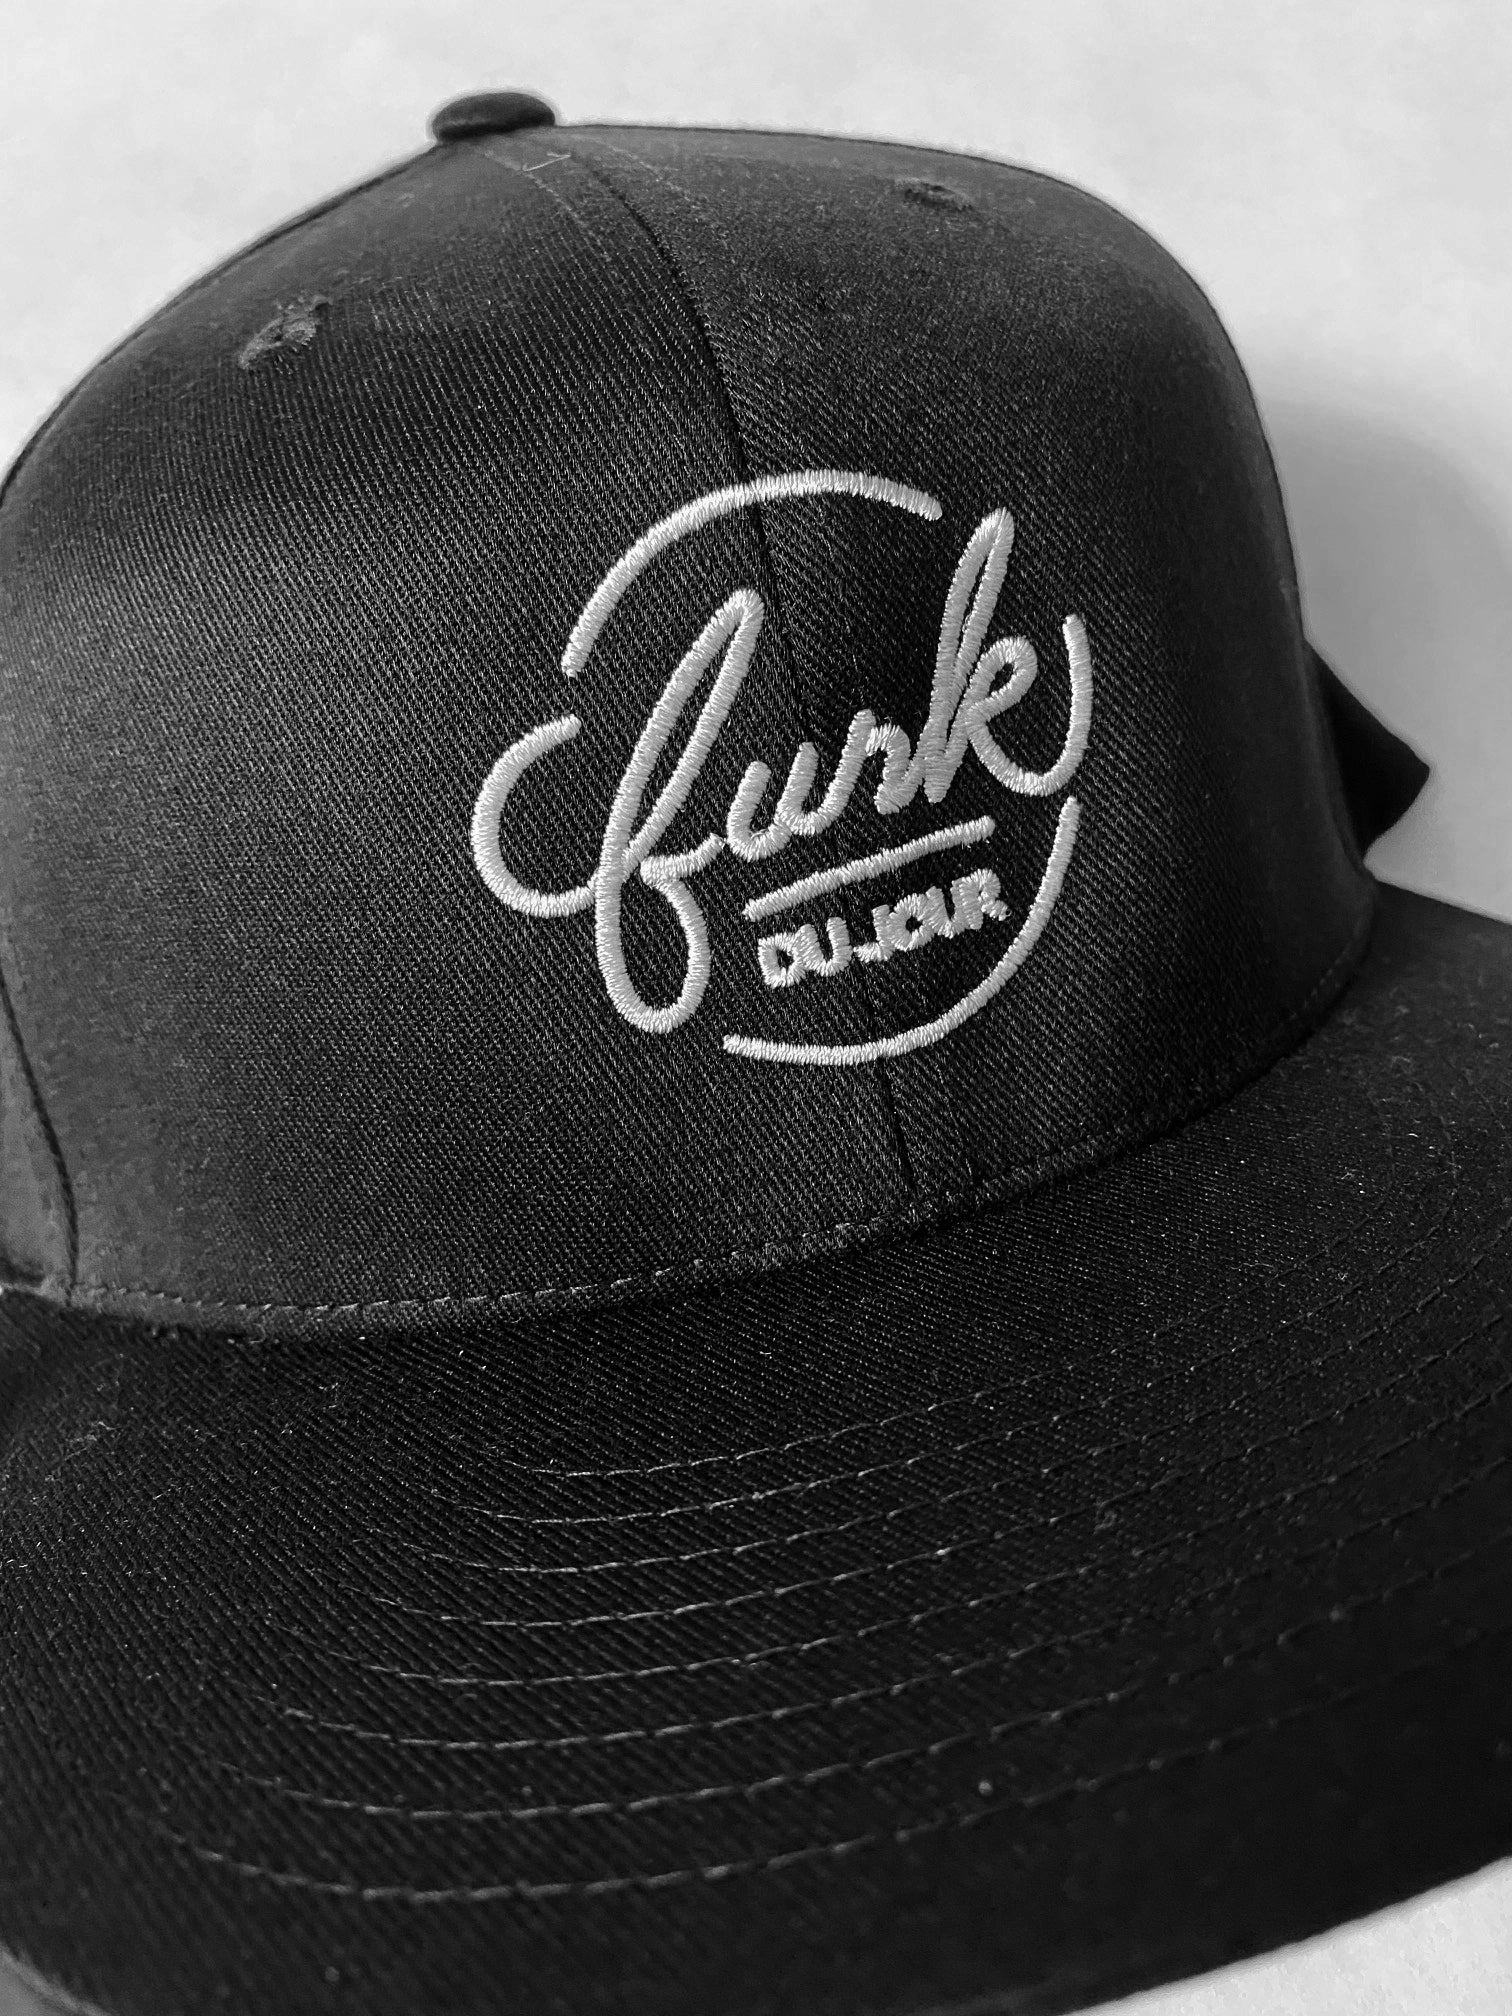 Classic Funk du Jour embroidered hat